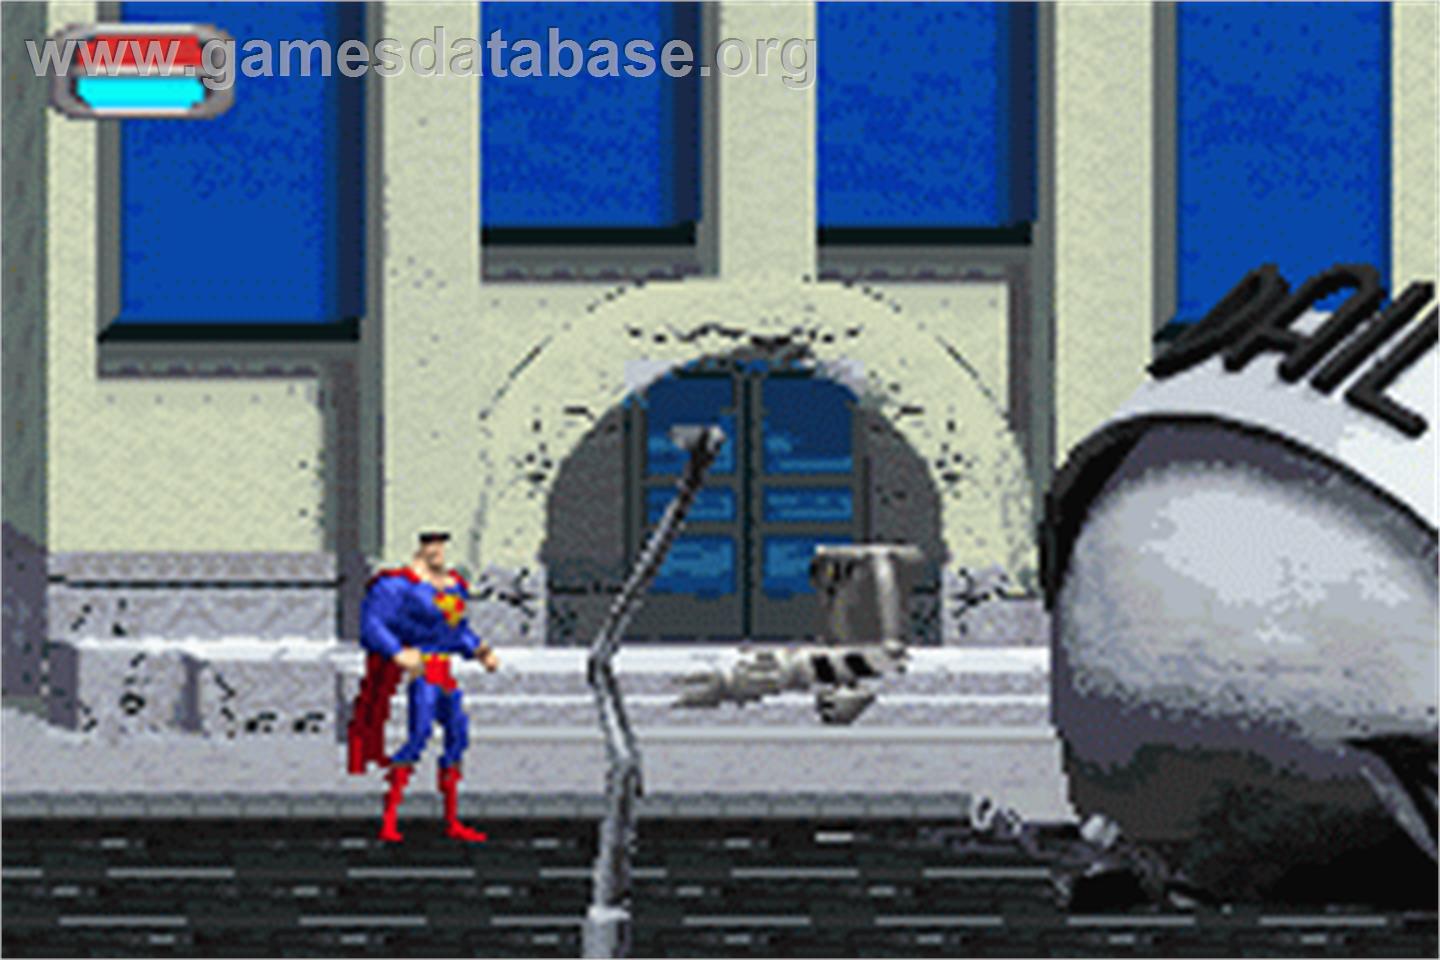 Justice League: Injustice for All - Nintendo Game Boy Advance - Artwork - In Game